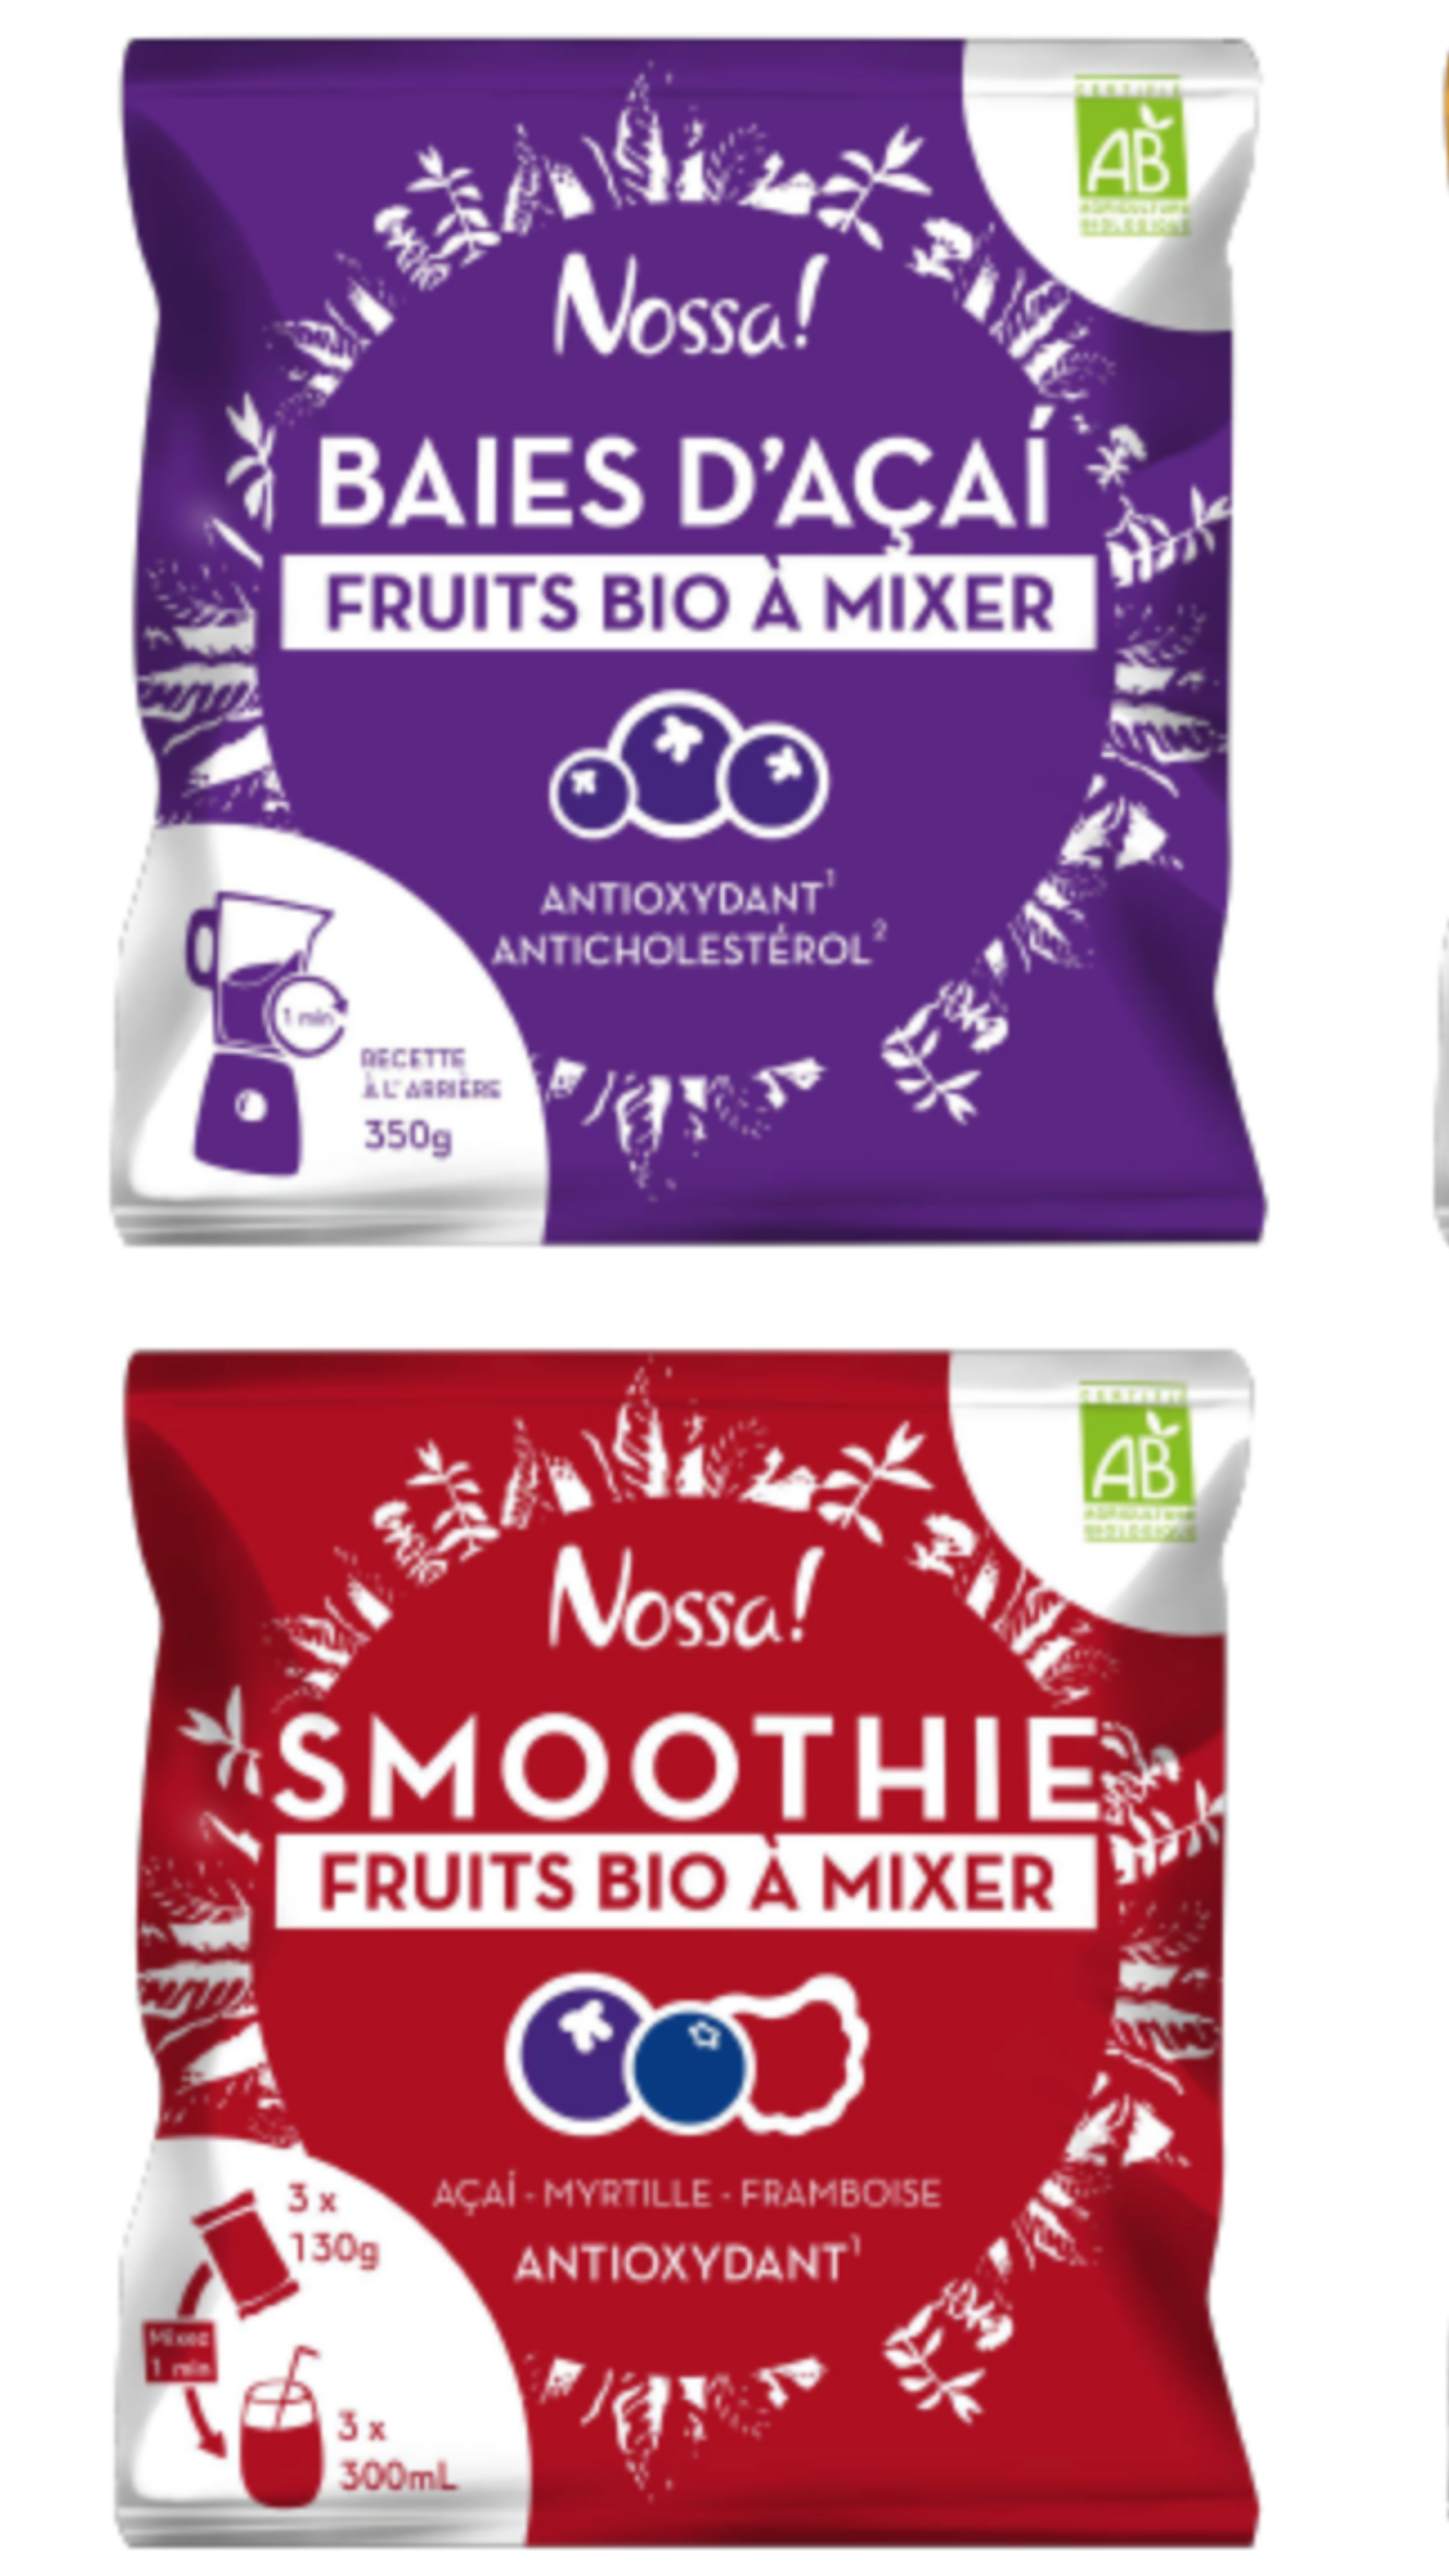 Packaging of Nossa! brand organic acai berry mix and smoothie mix, highlighting antioxidant benefits.